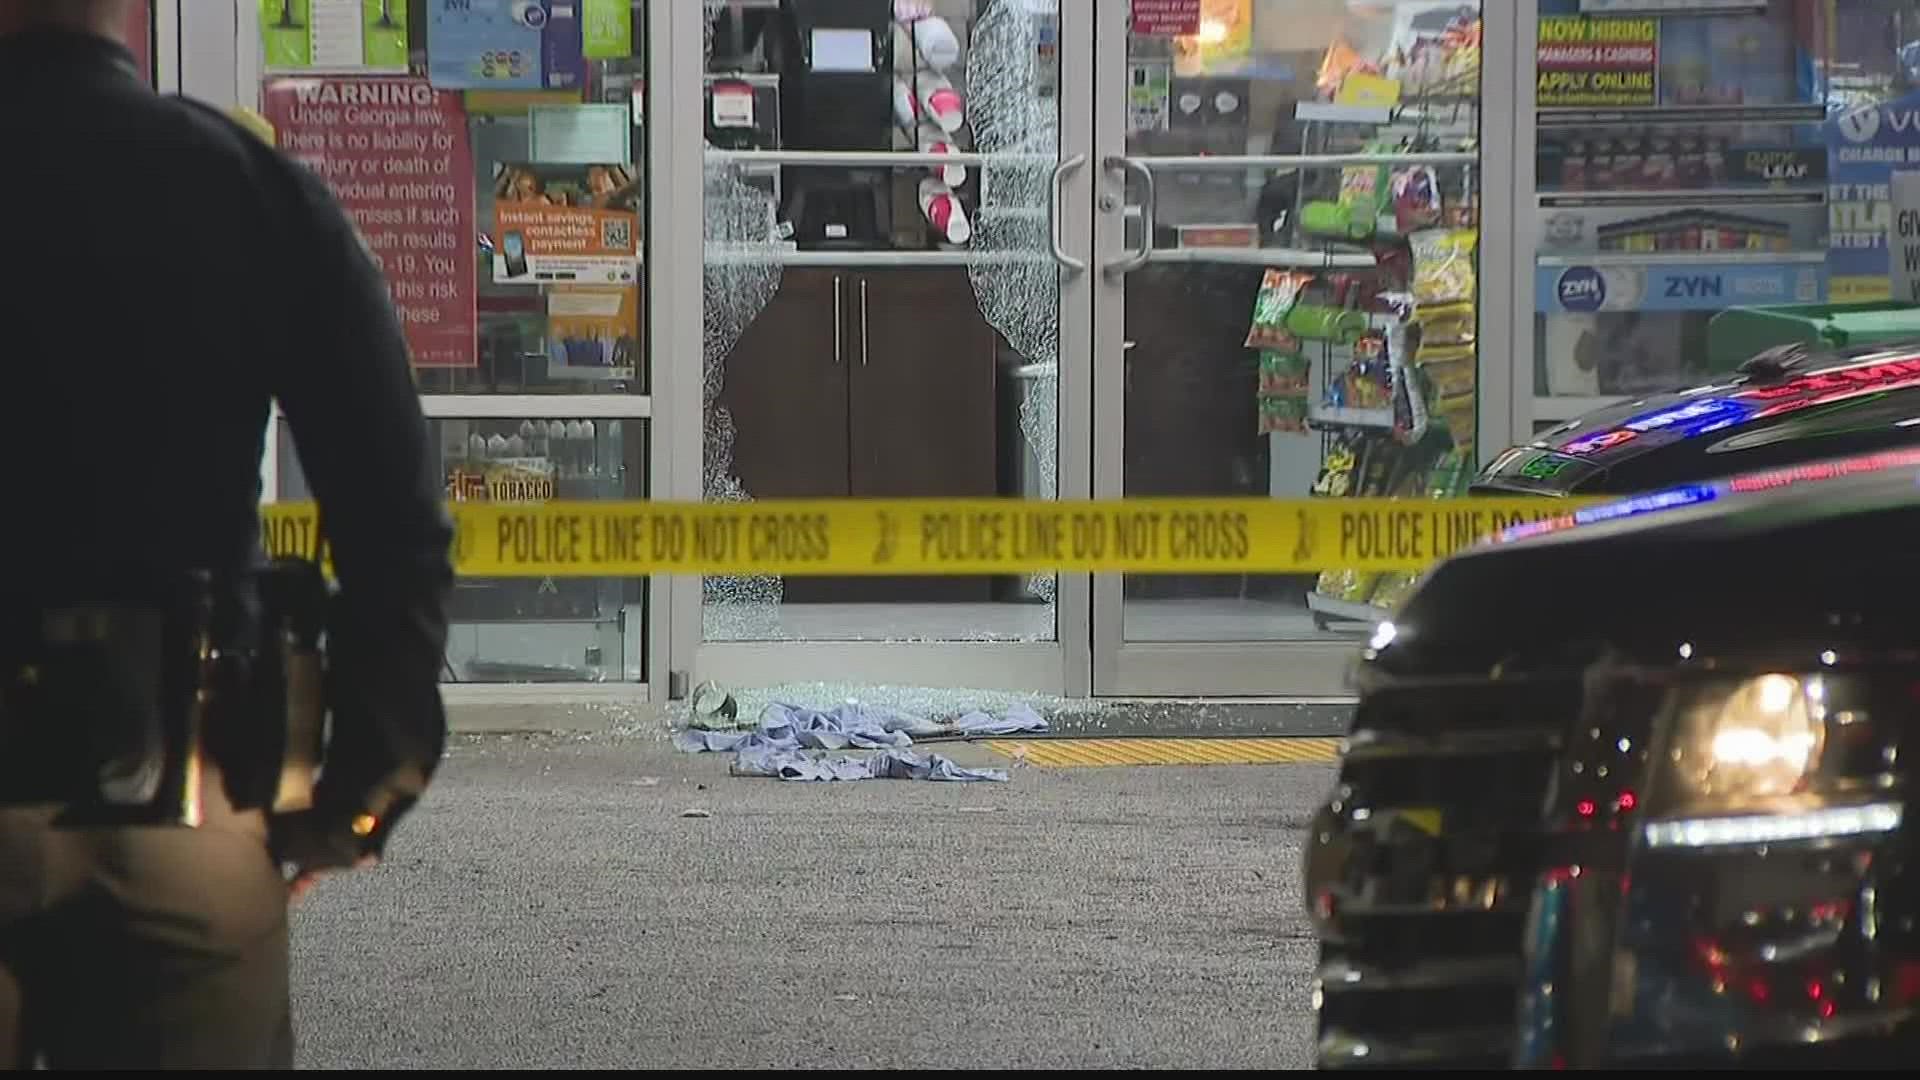 The shooting happened outside a BP gas station at the intersection of 14th Street New and Atlant Drive around 9 p.m. Wednesday.